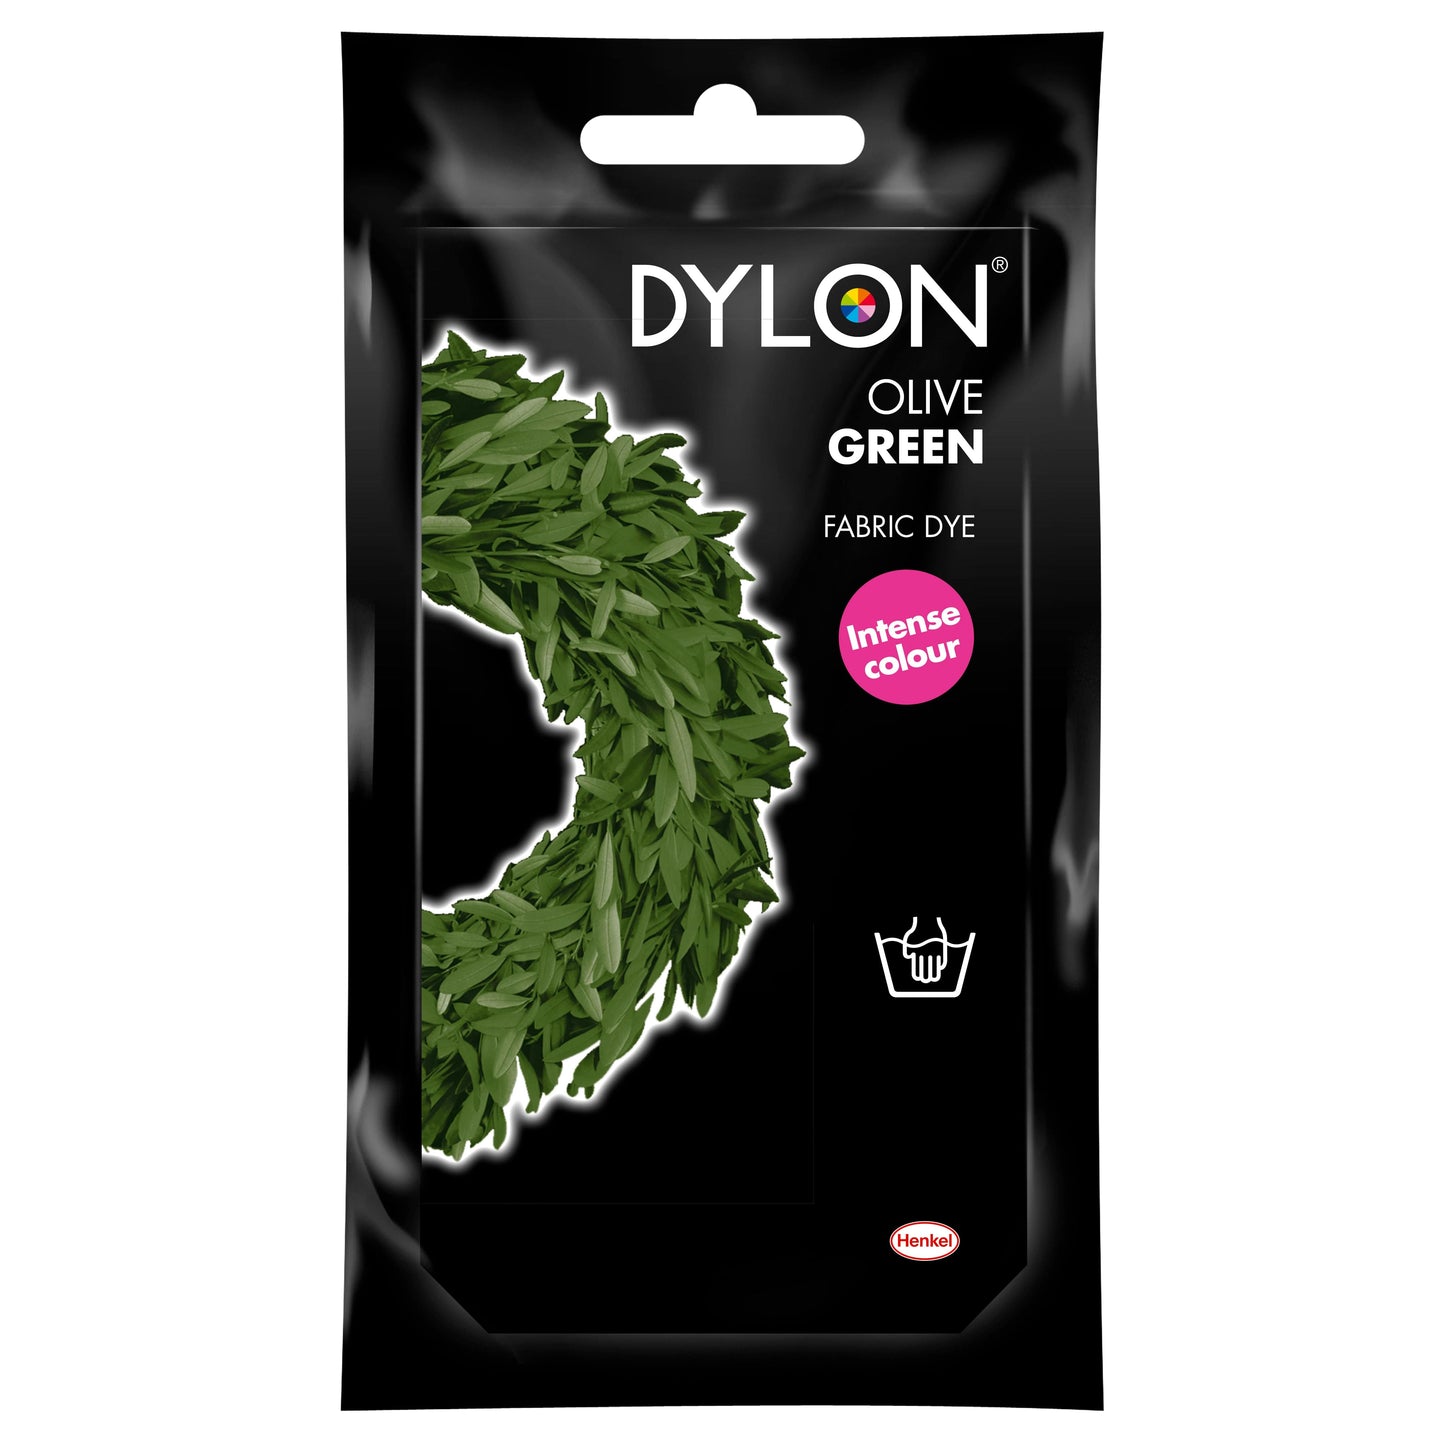 Dylon Hand Dye for Fabric in Olive Green